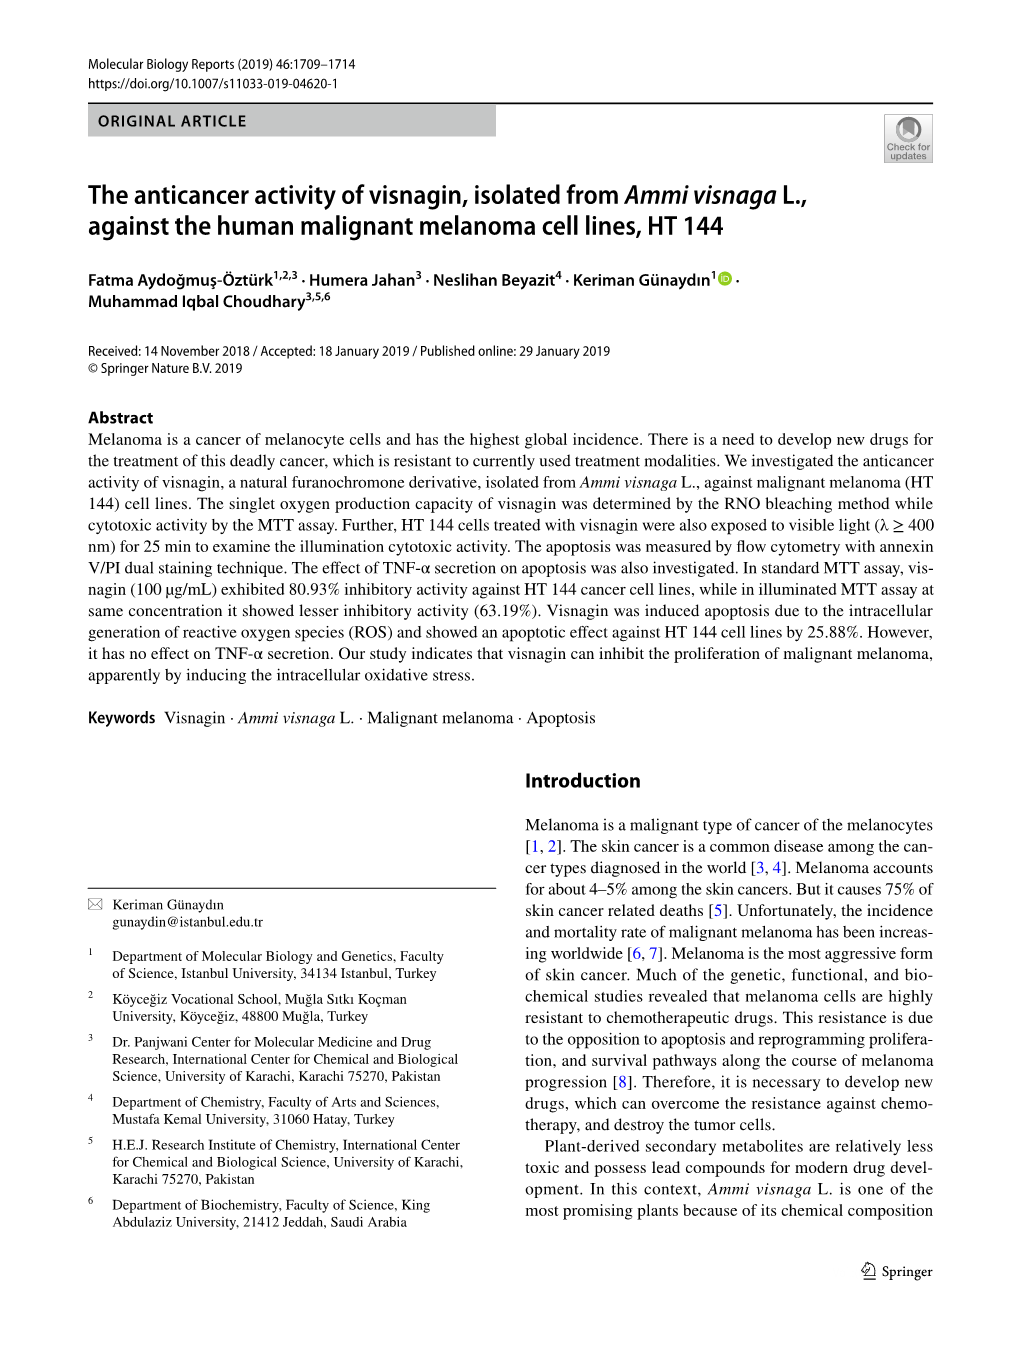 The Anticancer Activity of Visnagin, Isolated from Ammi Visnaga L., Against the Human Malignant Melanoma Cell Lines, HT 144